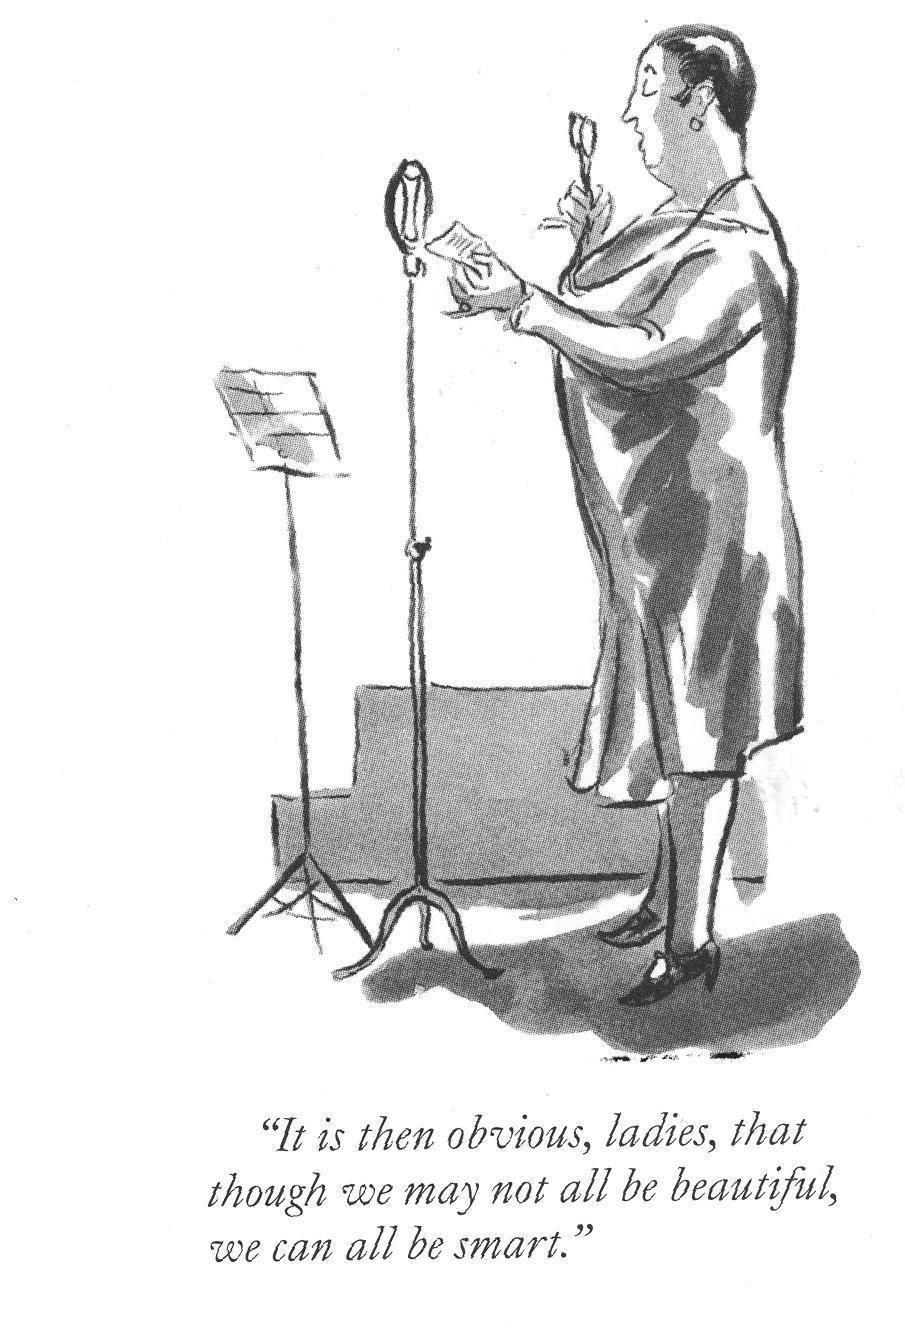 Helen Hokinson began selling her work to <em>The New Yorker</em> in 1925 and became one of the most celebrated cartoonists of the early magazine until her untimely death in 1949. She published around 1,800 cartoons and covers.